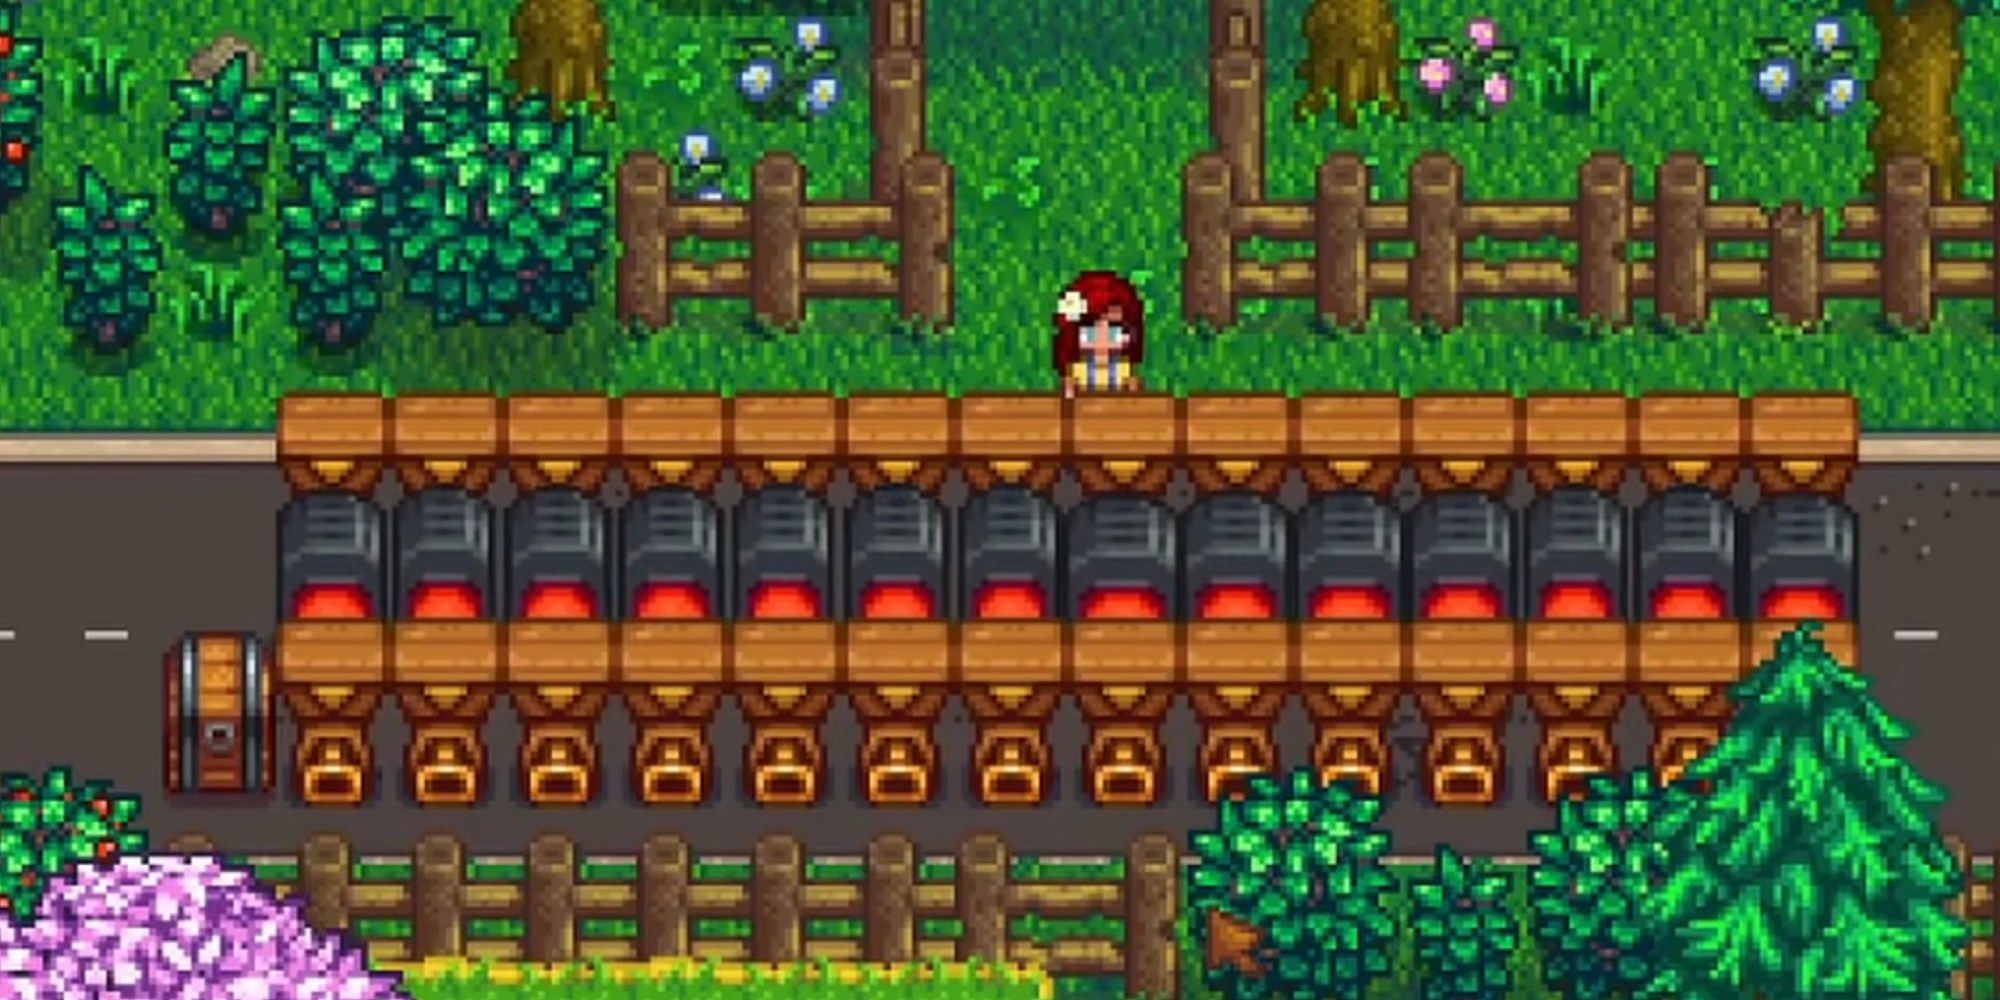 Using hoppers to smelt materials in Stardew Valley